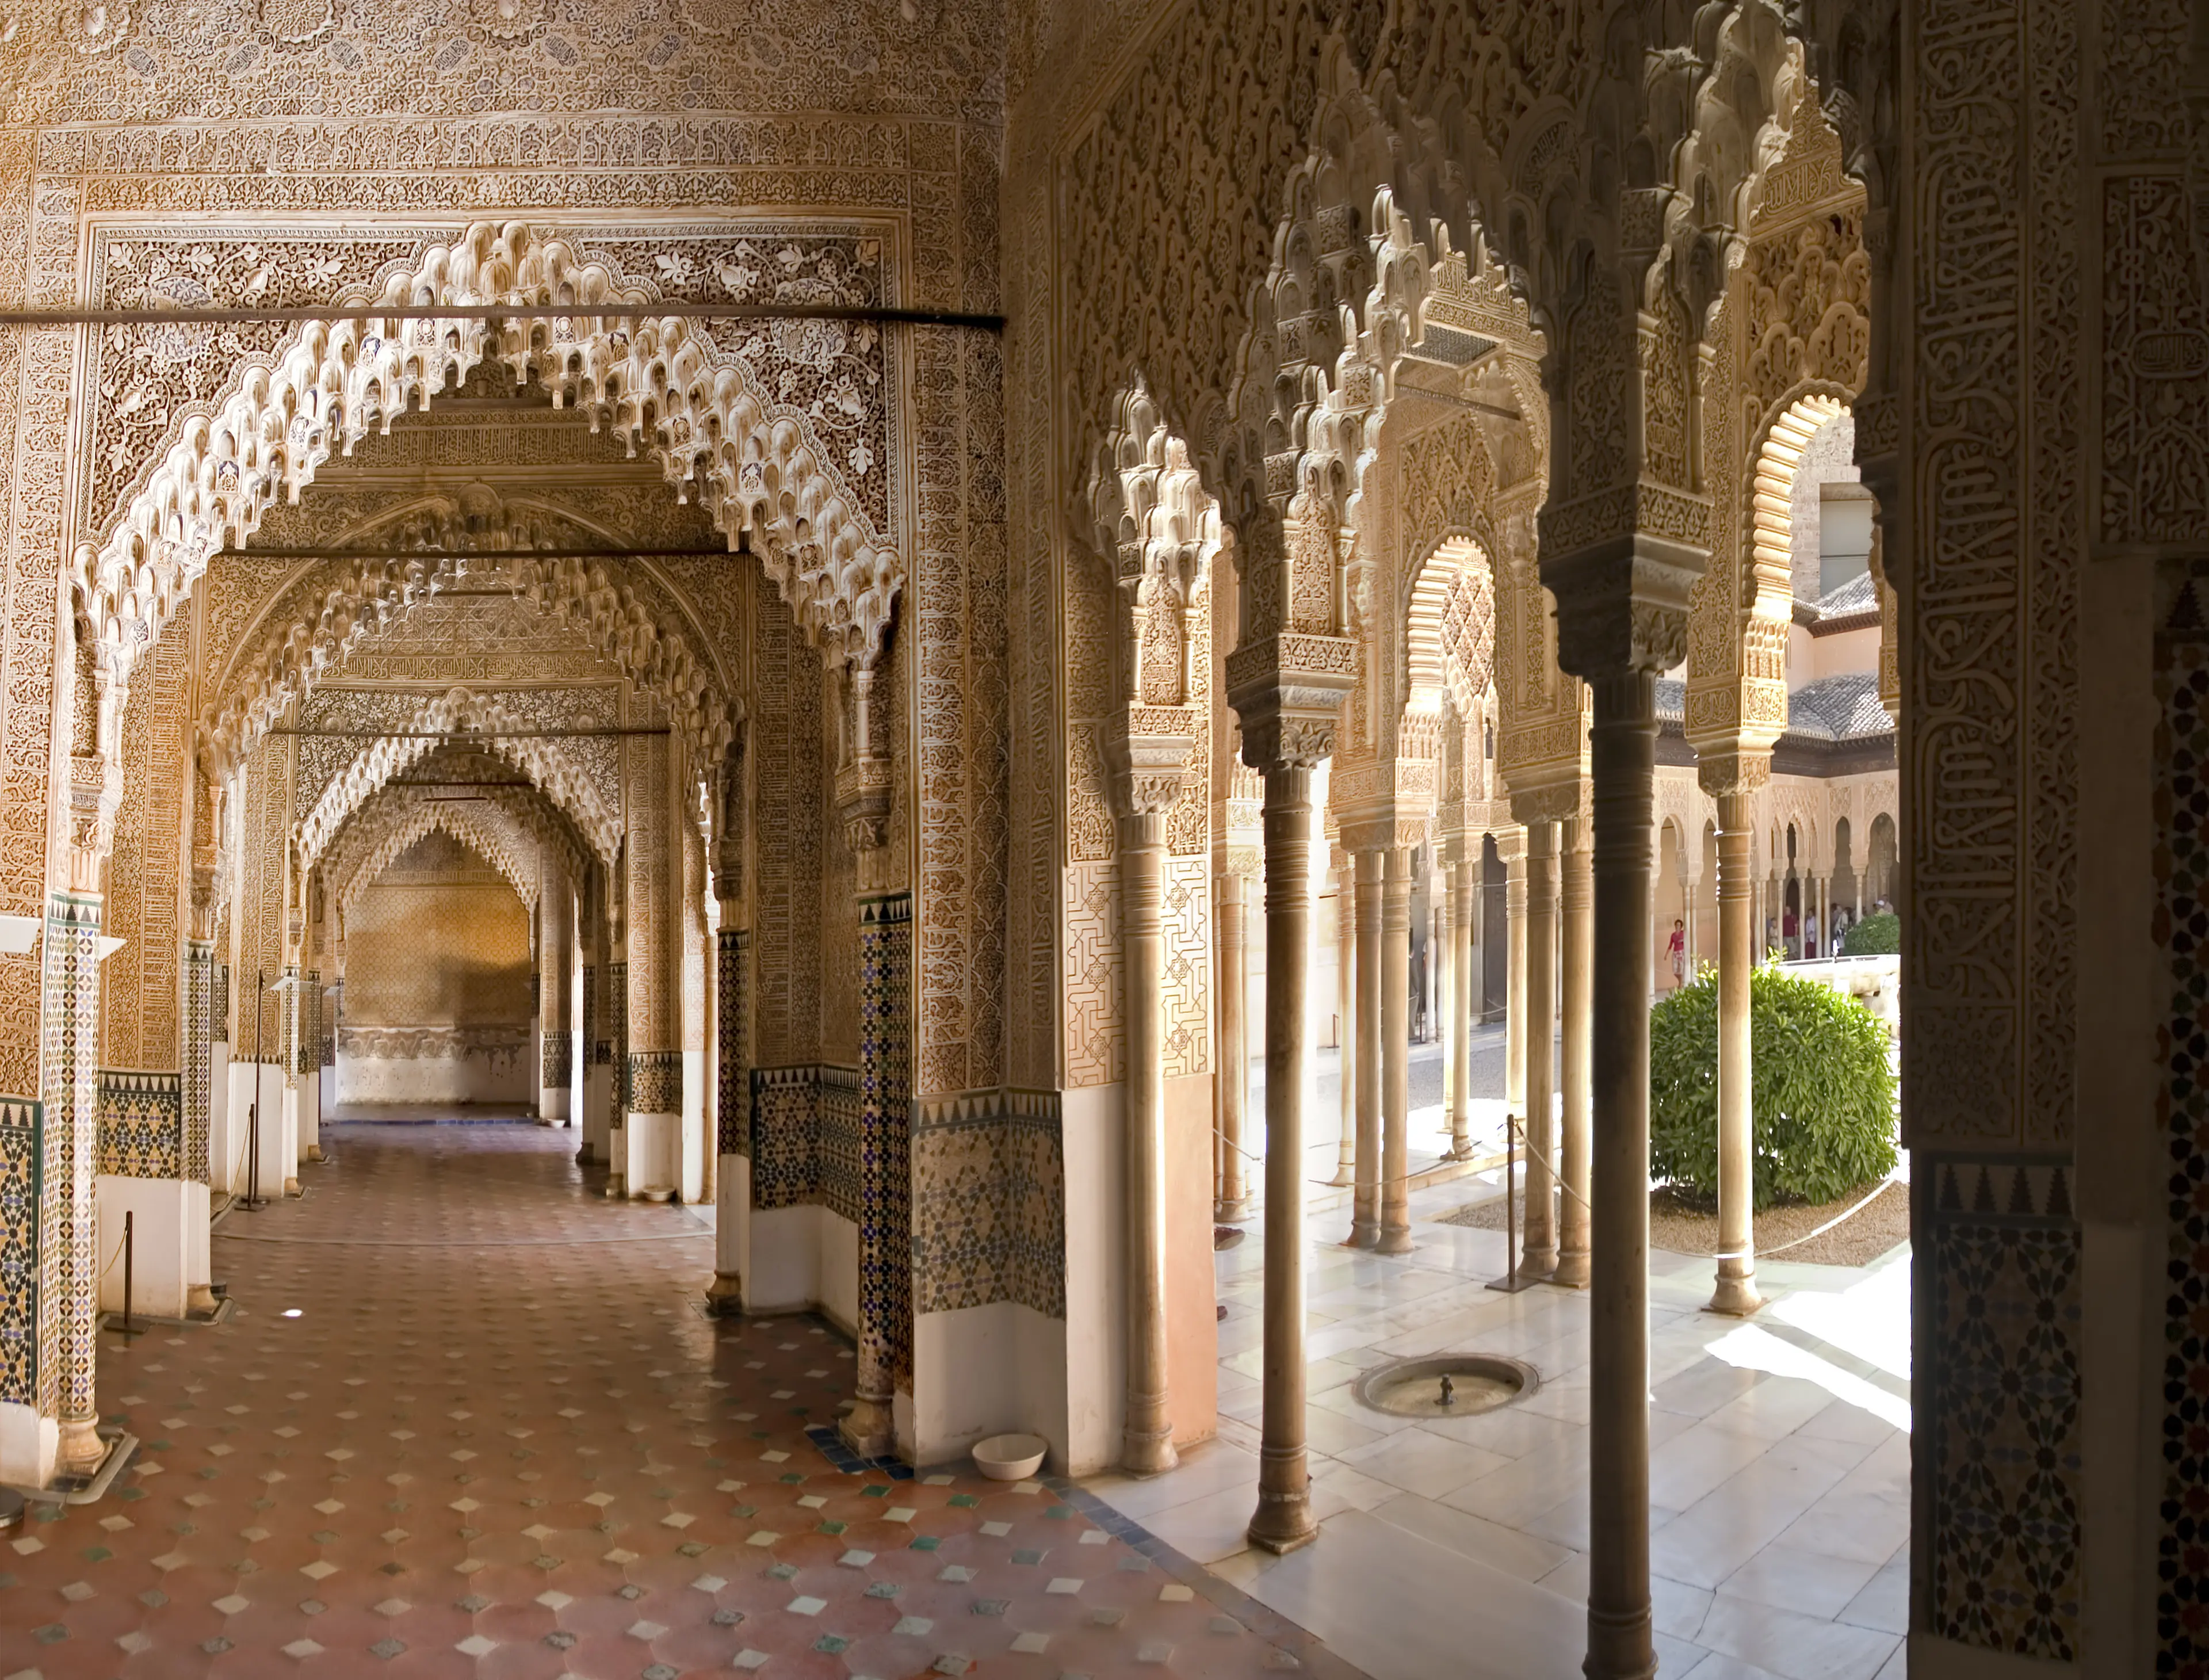 Hall in Alhambra